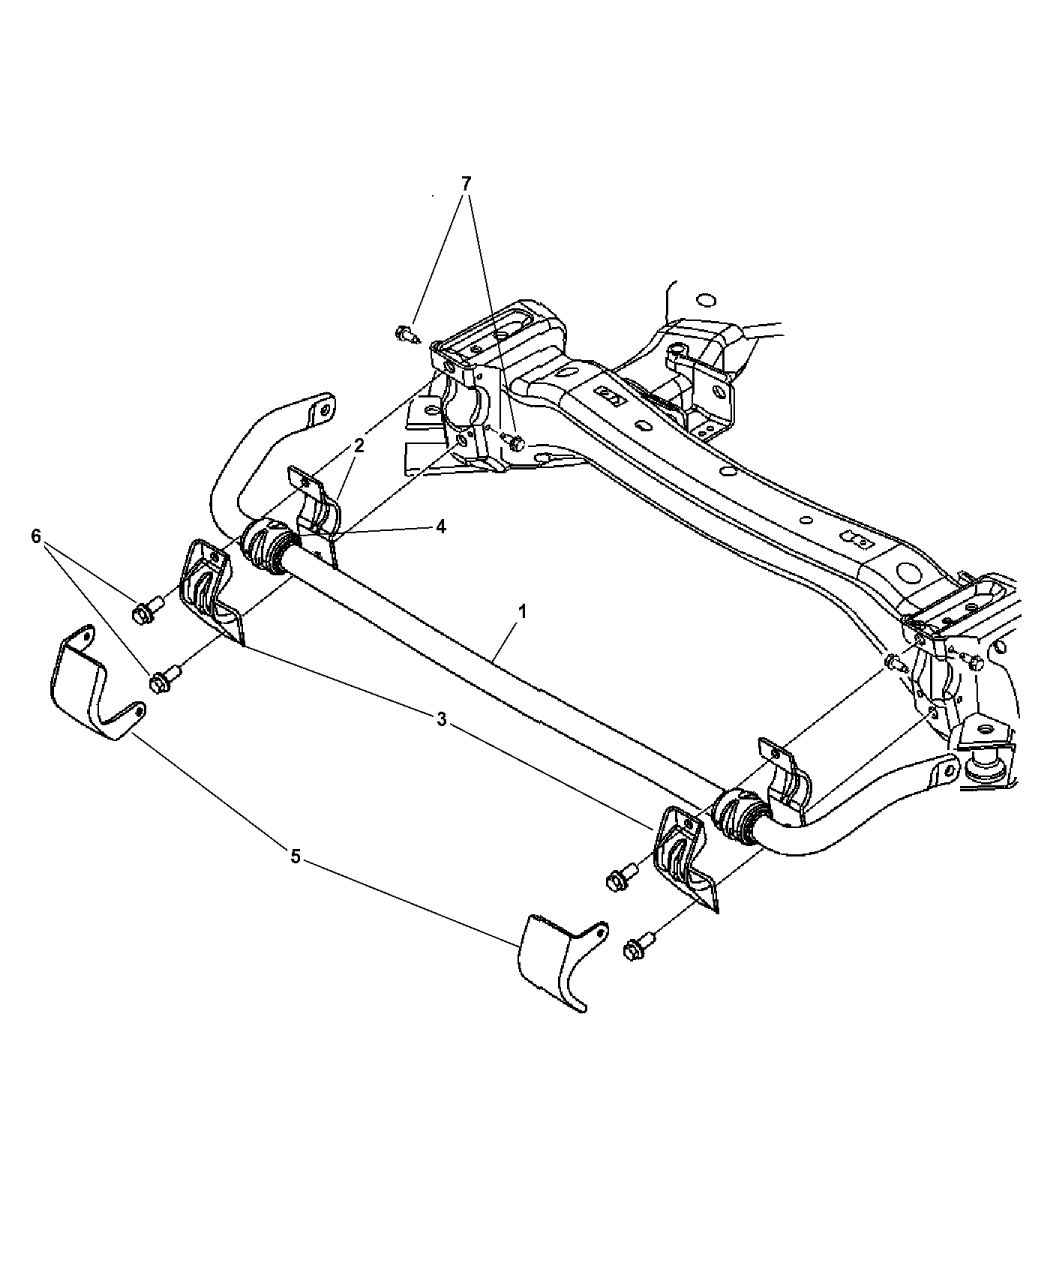 2006 Dodge Charger Front Suspension Diagram How Much?